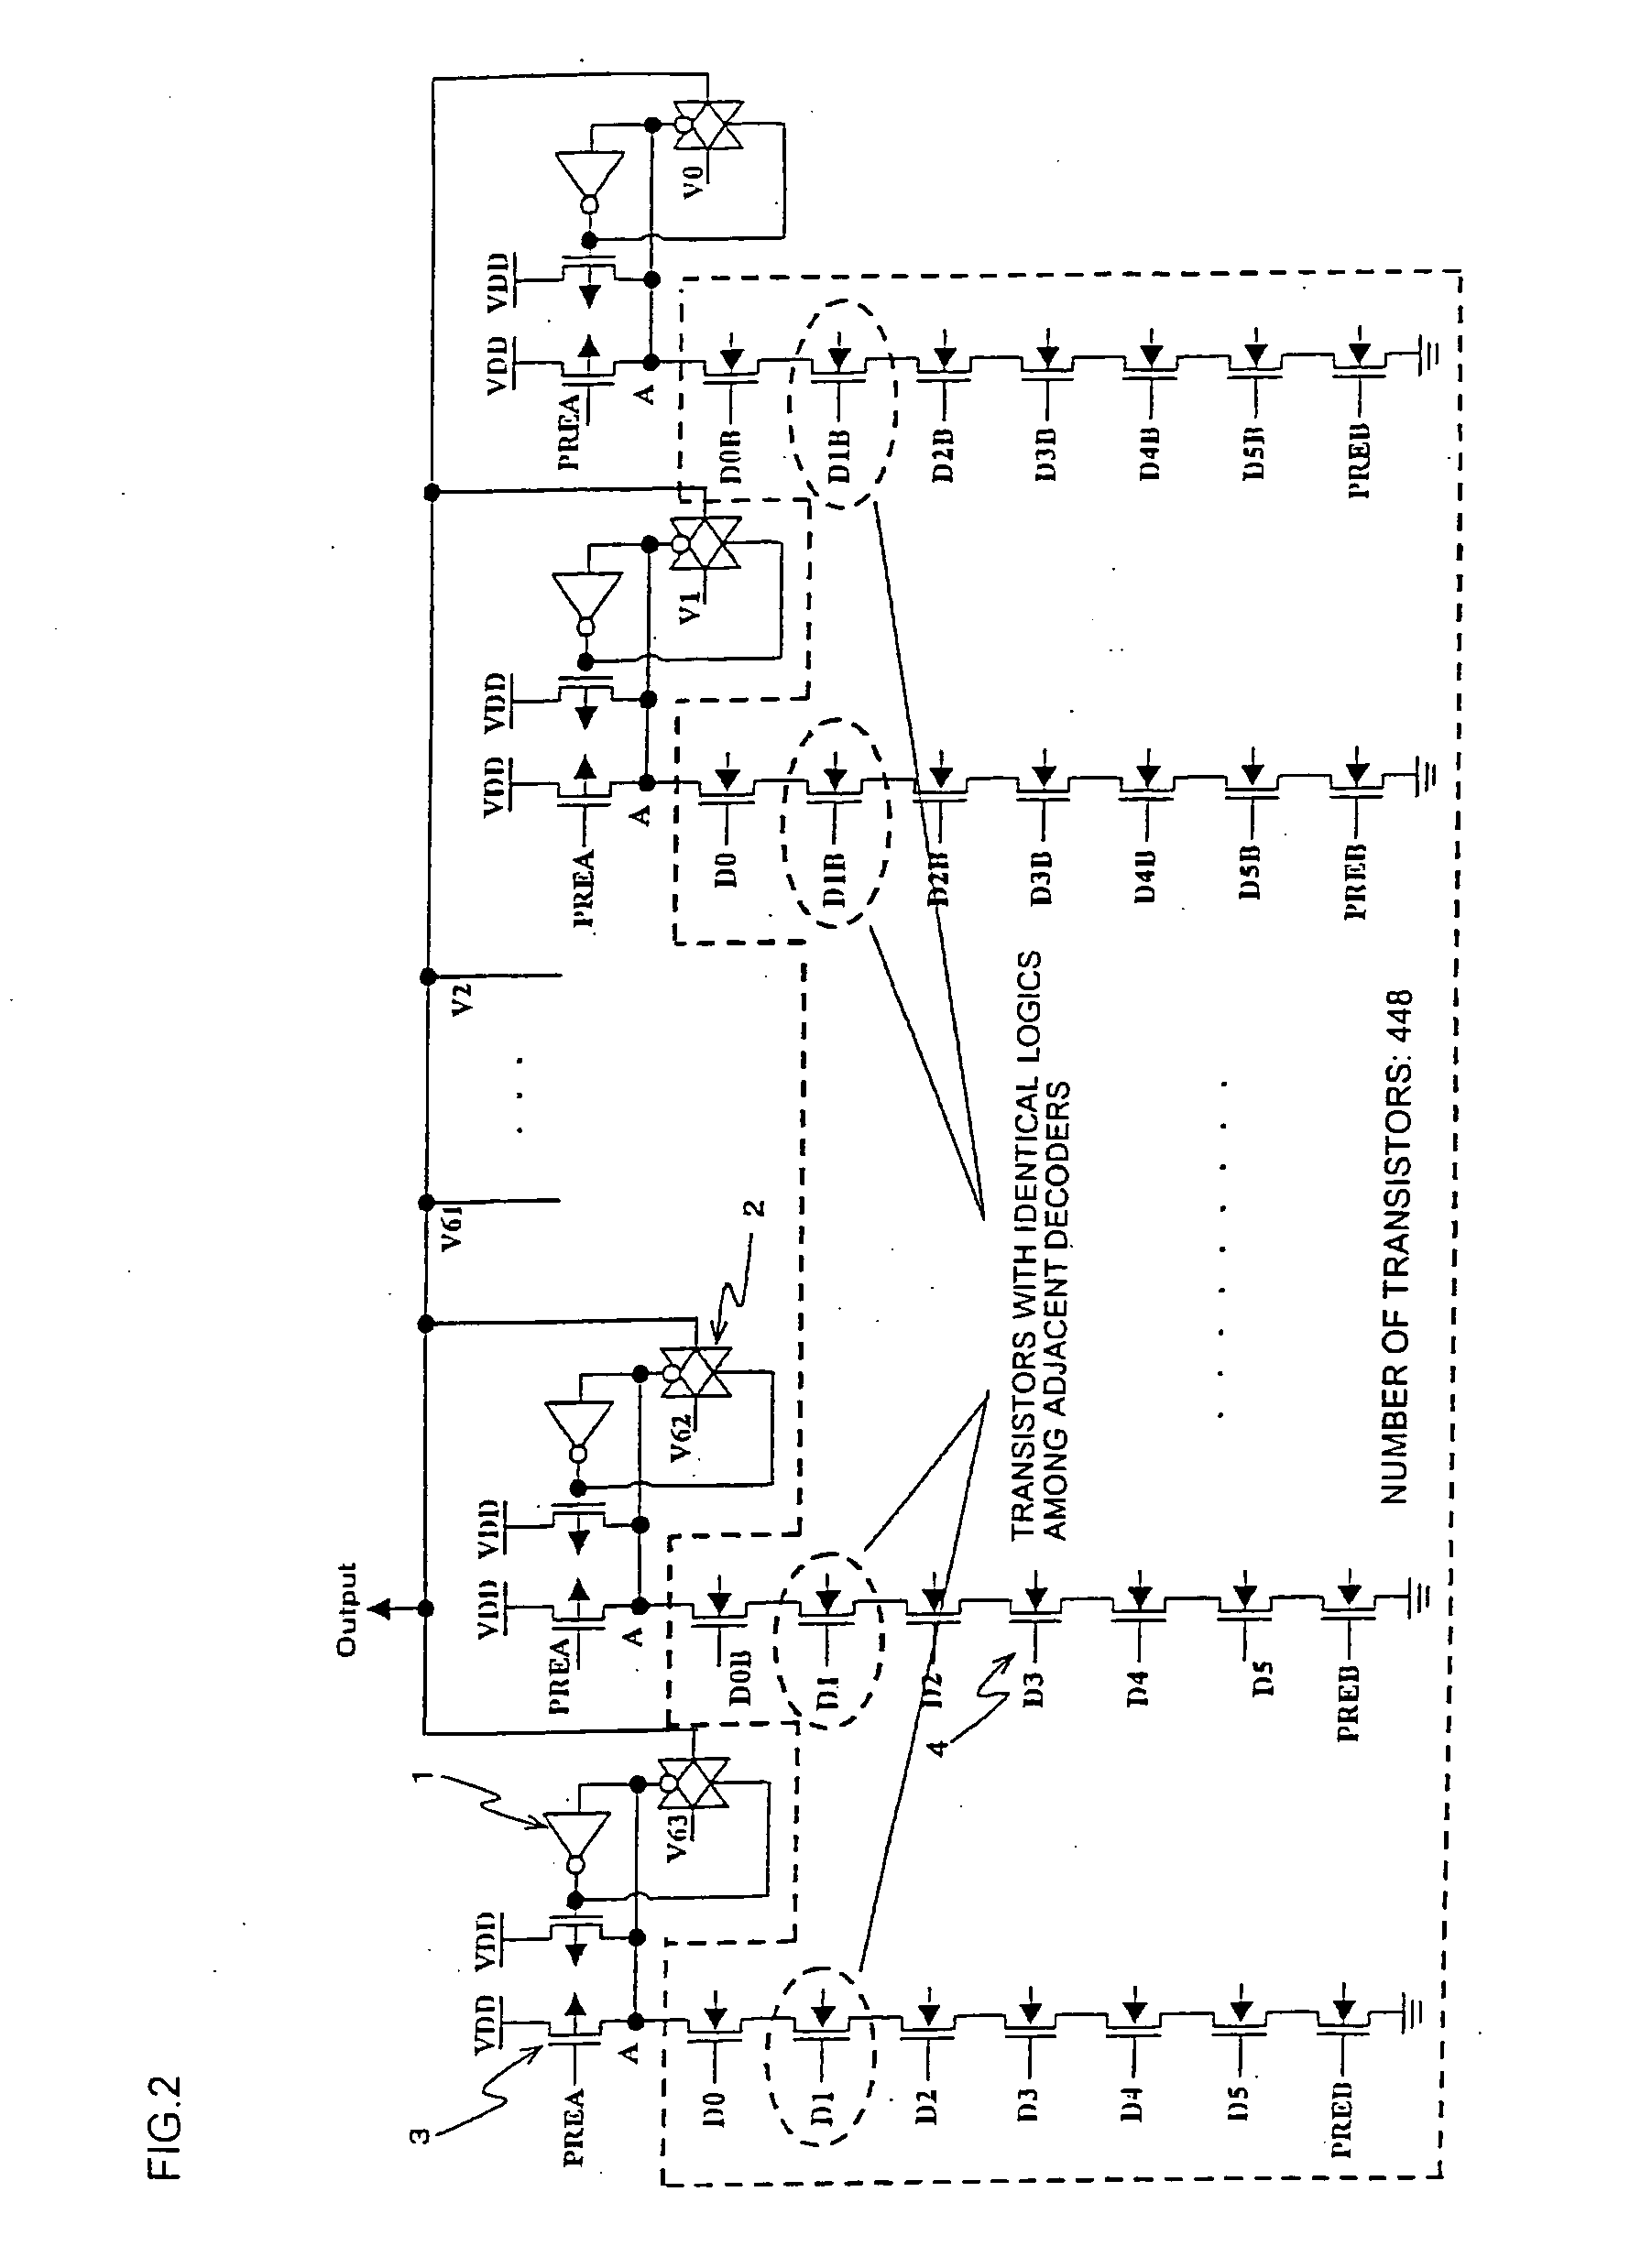 Driving circuit for liquid crystal device